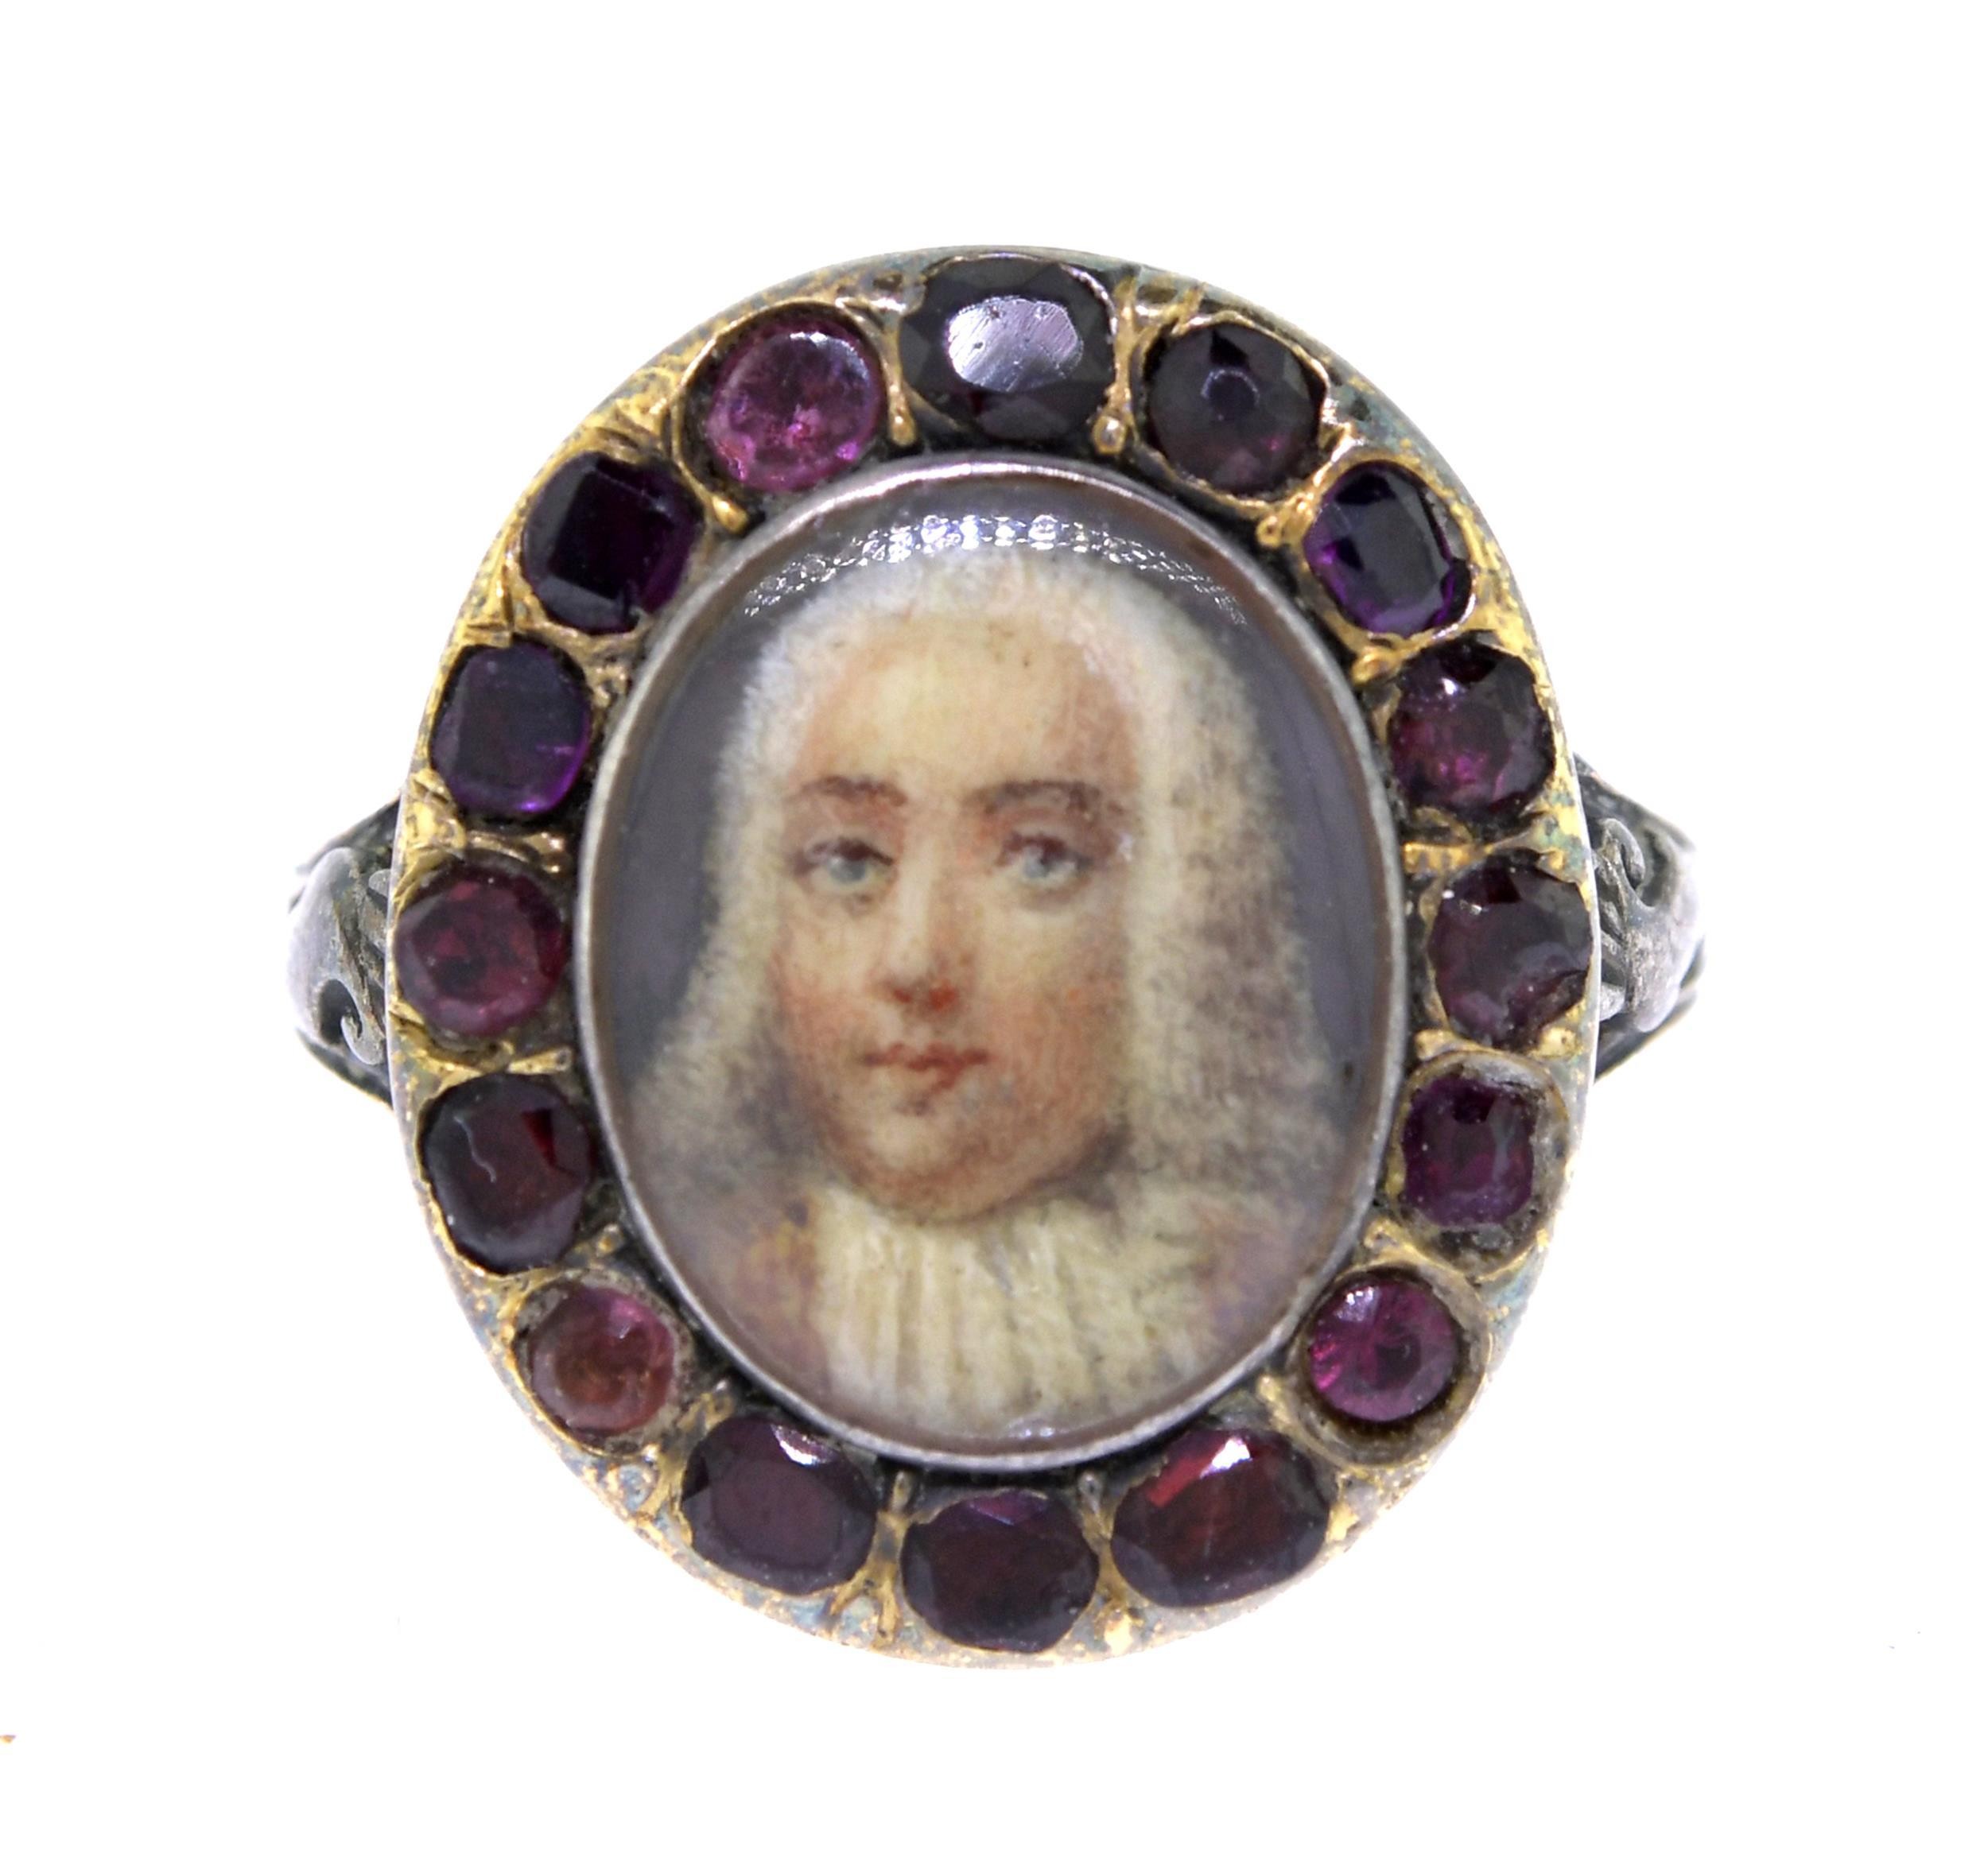 GEORGIAN PORTRAIT RING OF MAN SURROUNDED 3aa947